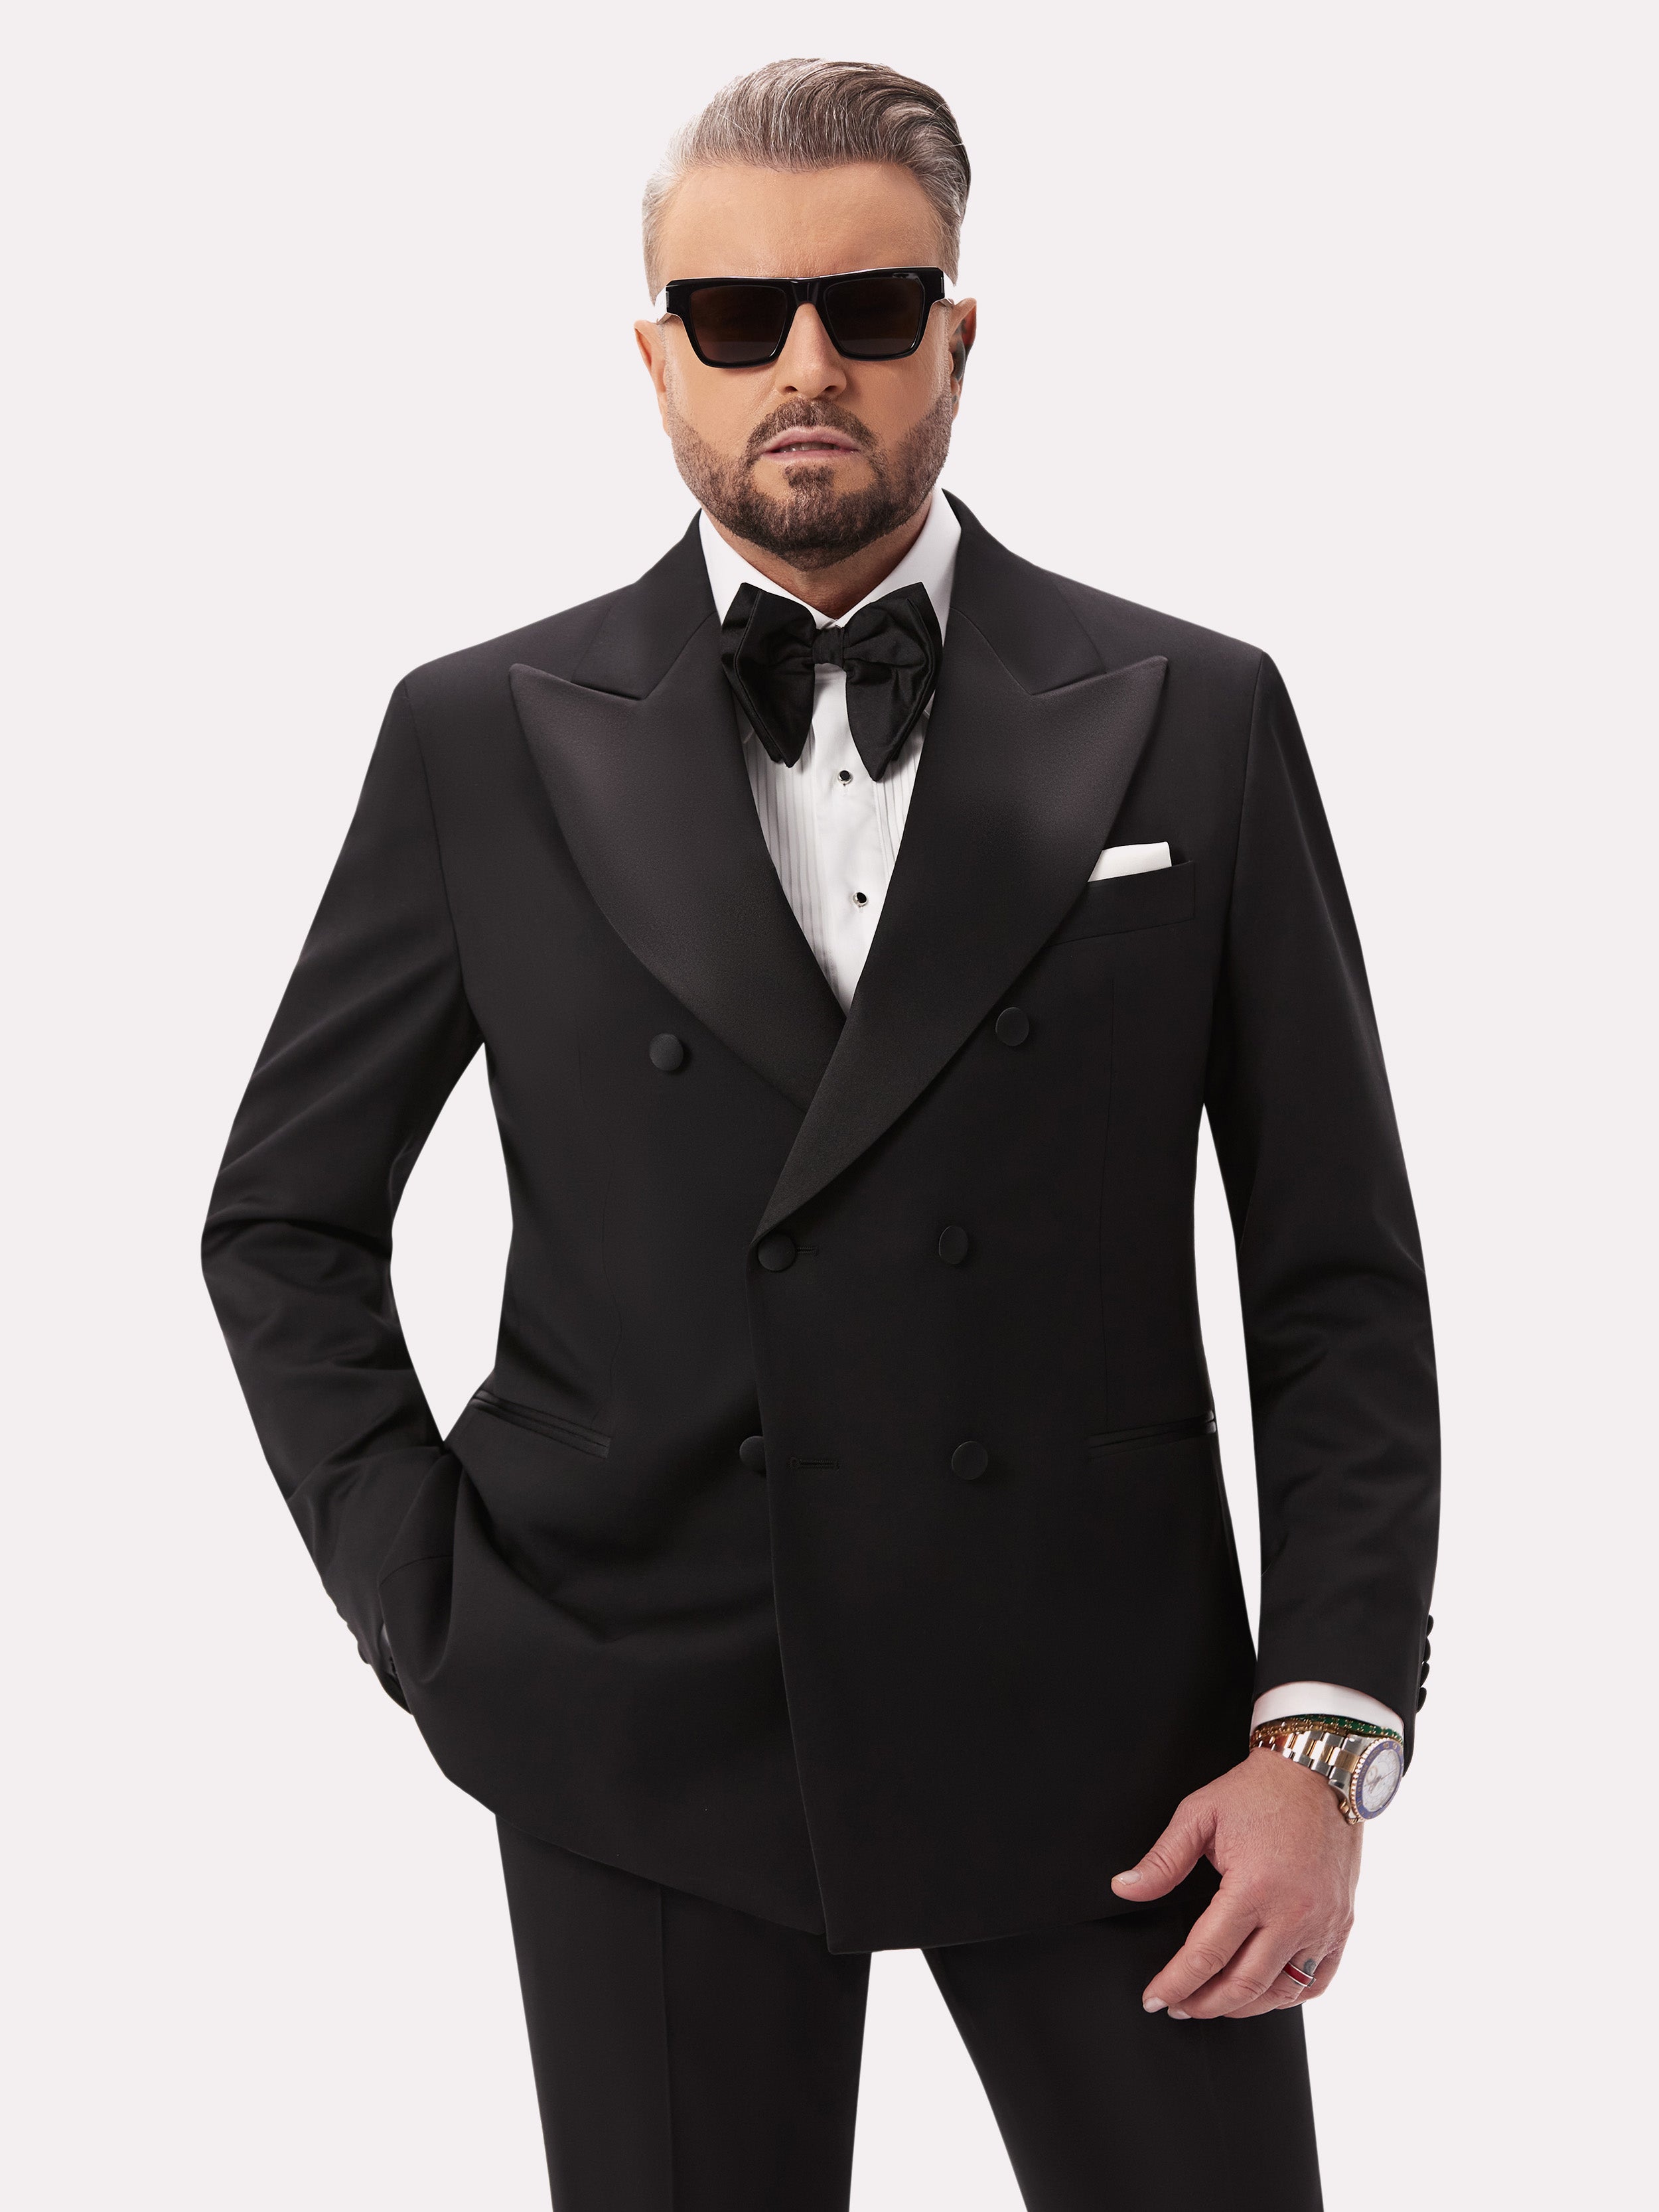 Black tuxedo jacket with two rows of buttons